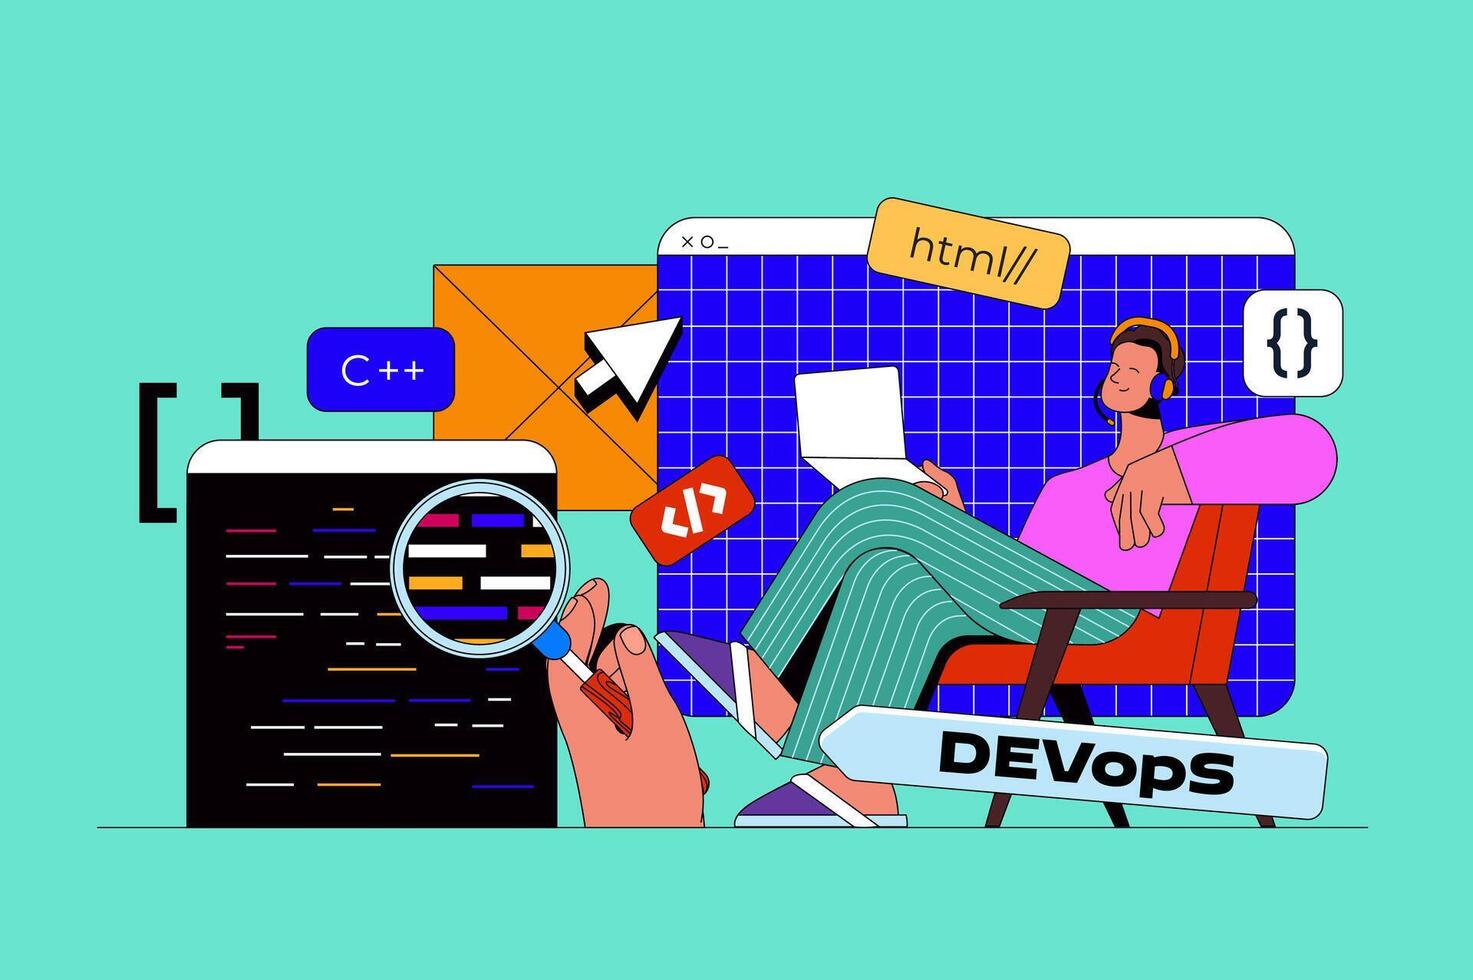 Programming and development web concept with character scene. Developer working with program languages, coding and testing. People situation in flat design. Vector illustration for marketing material.